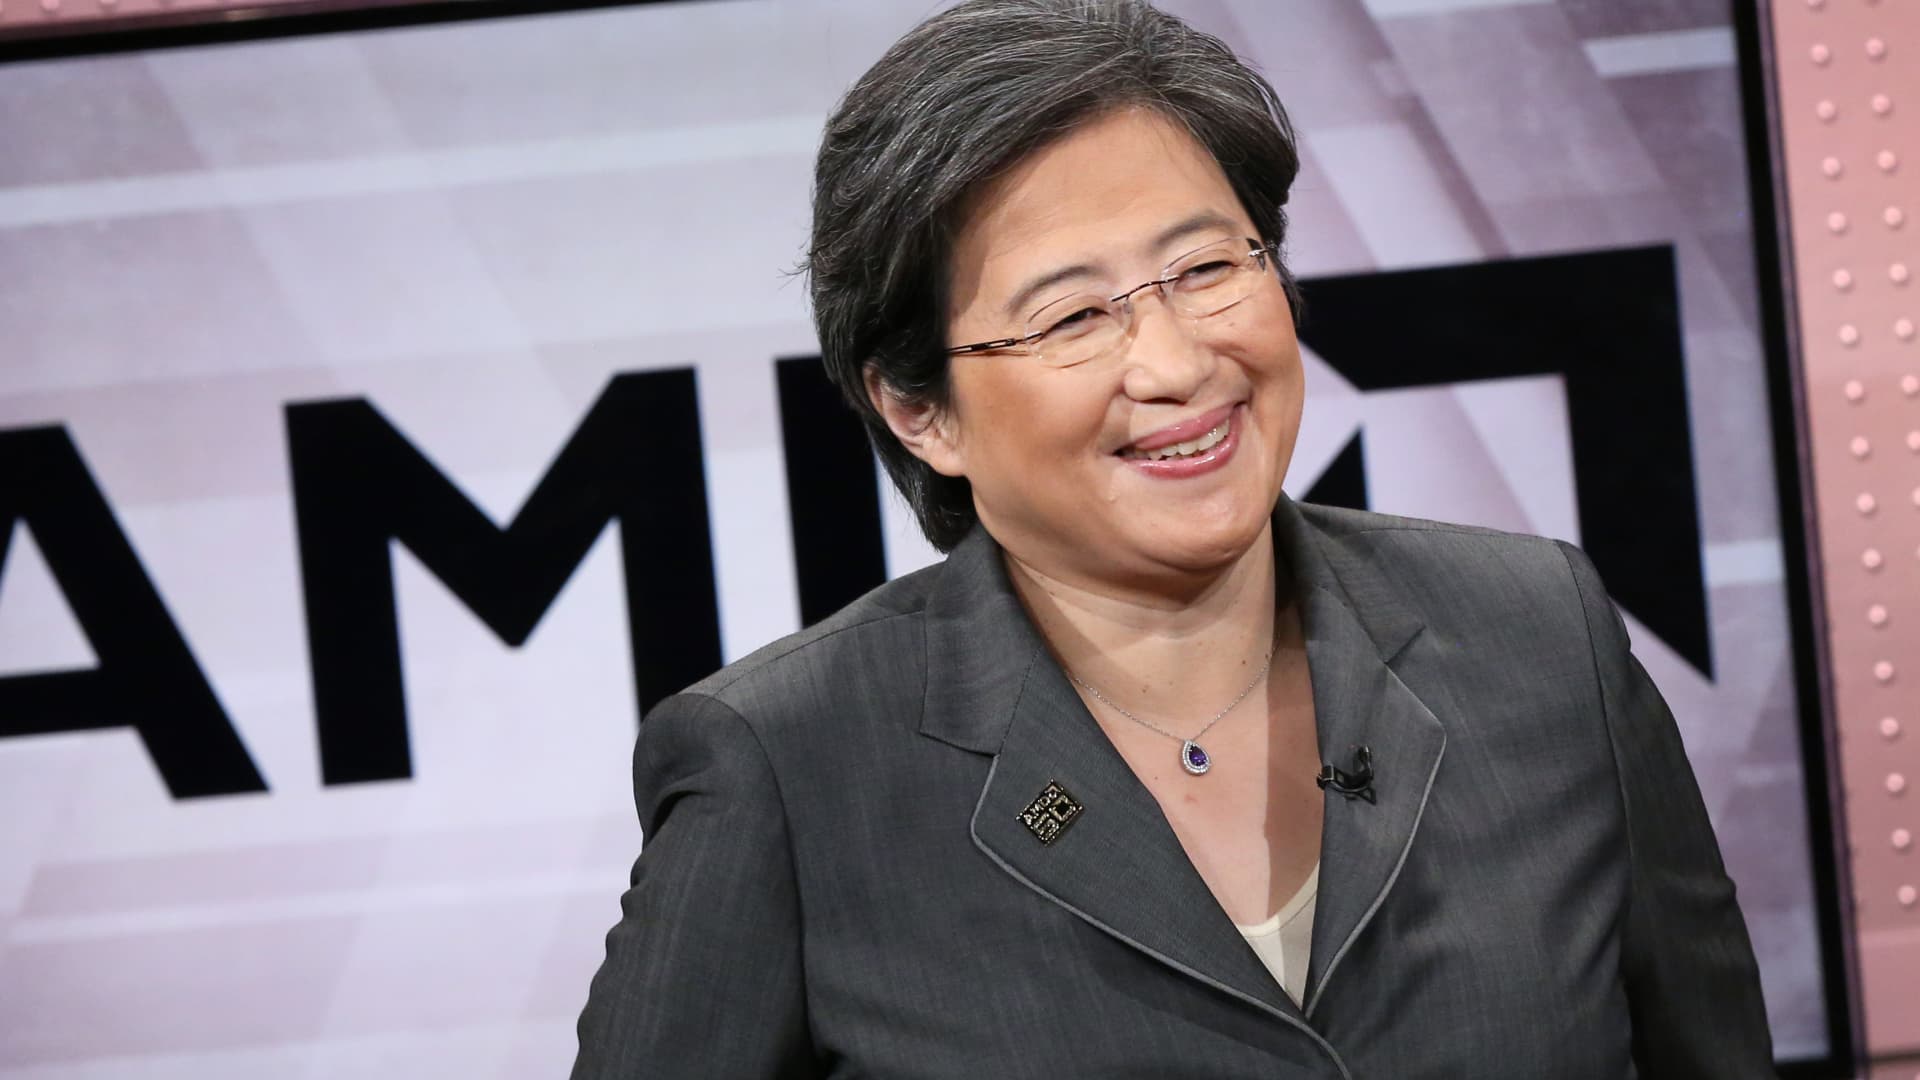 AMD jumps 9% on report Microsoft is collaborating on A.I. chip push